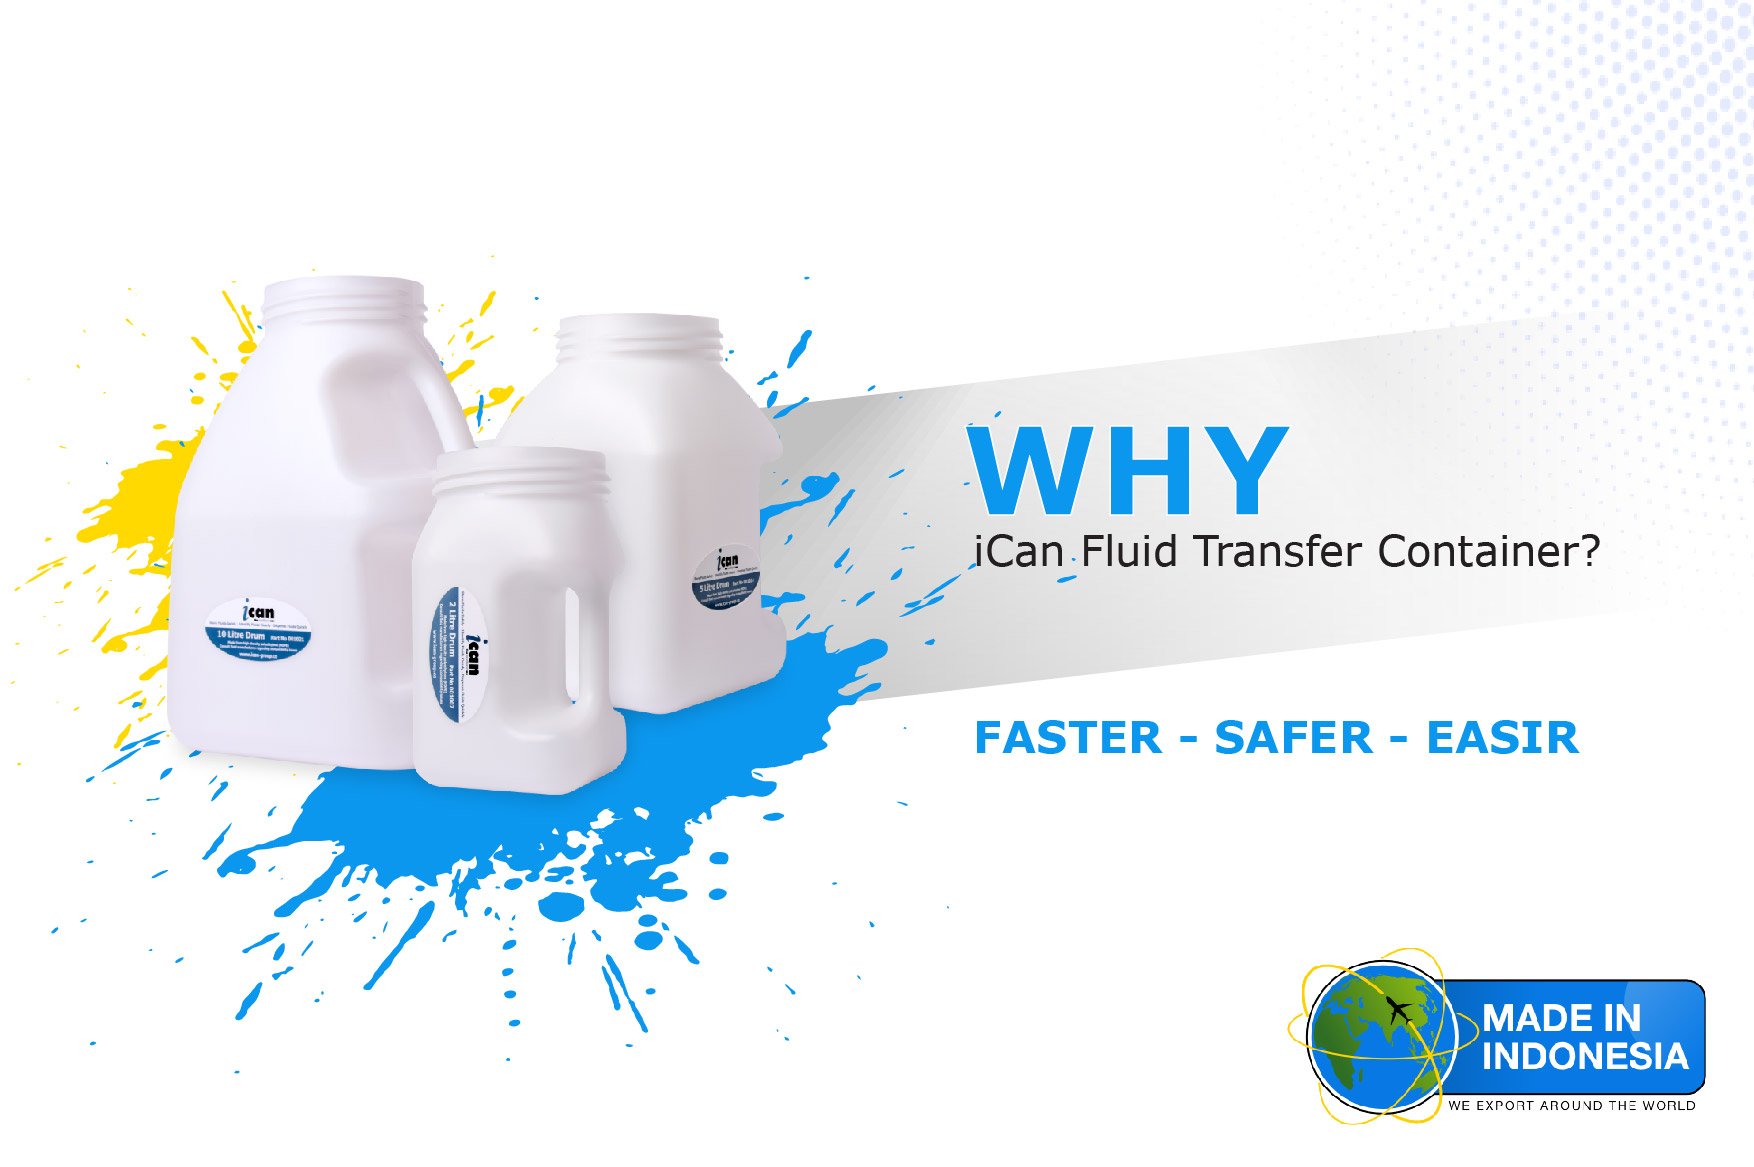 iCan Fluid Transfer Container